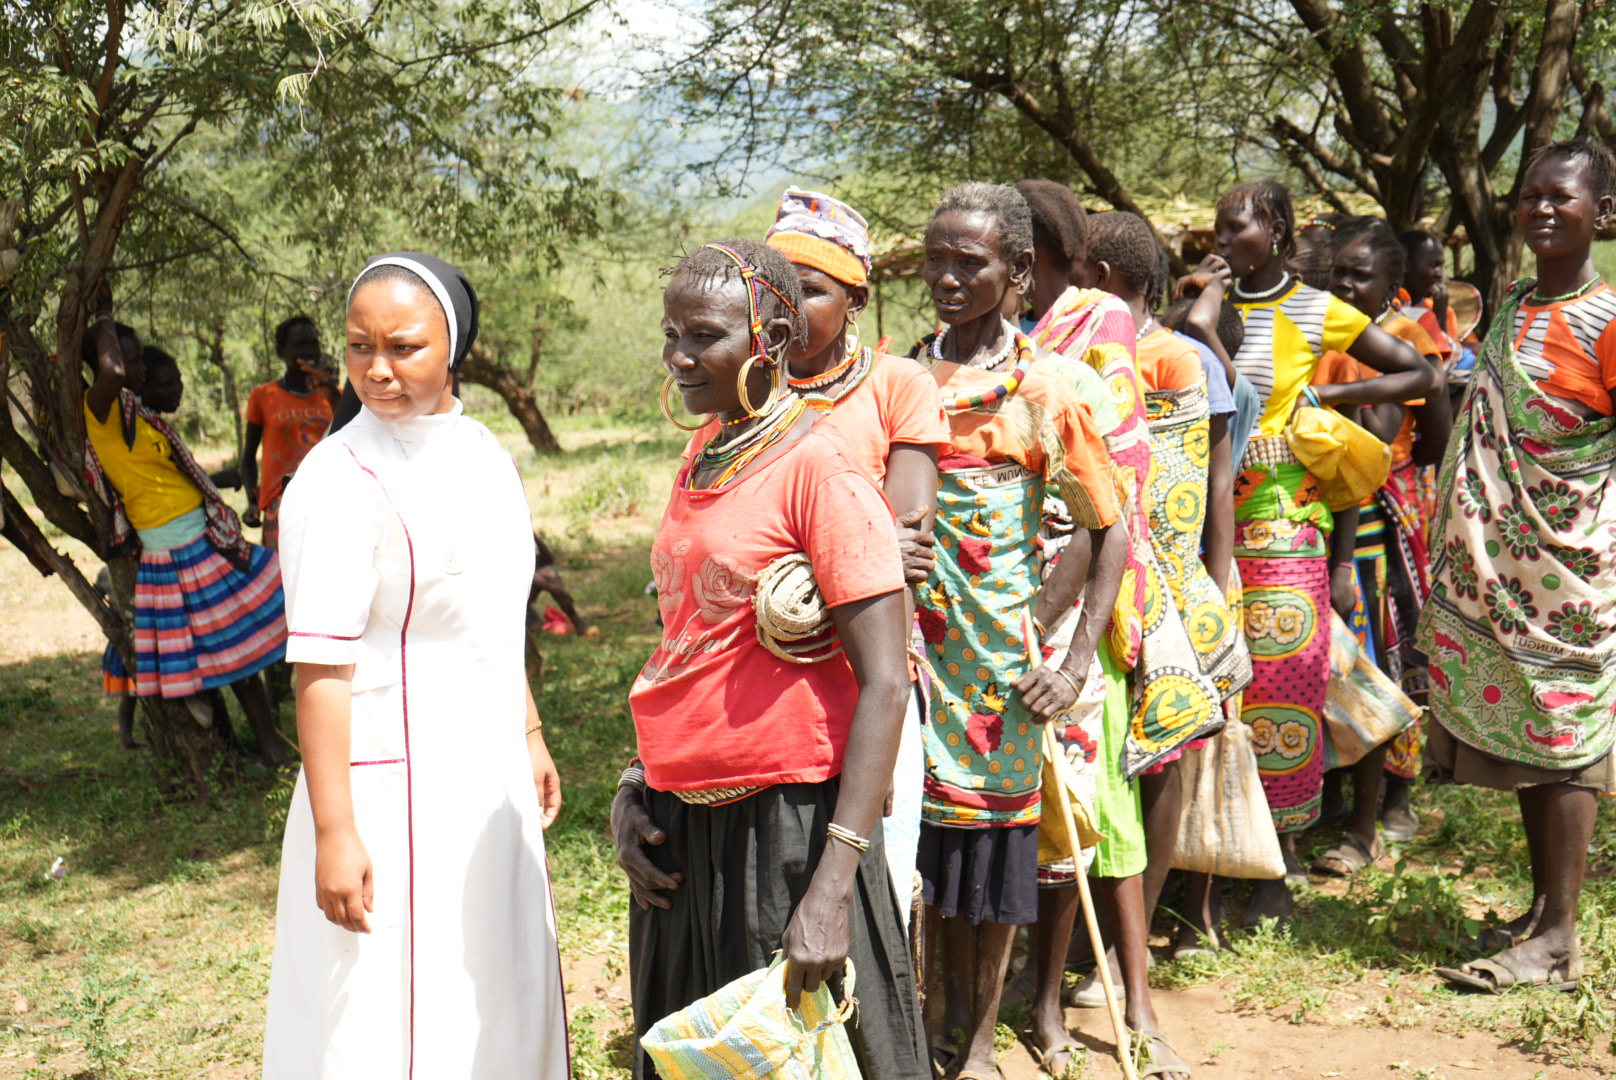 Sr. Annestacia Wanza oversees a line of senior women waiting eagerly with sacks for their supplies of maize rations. The "Food for Women and Elderly" initiative by the Incarnate Word Sisters caters to the most susceptible group to starvation, as many of them cannot keep up with the nomadic lifestyle of the Pokot people given their age. (GSR photo/Wycliff Peter Oundo) 